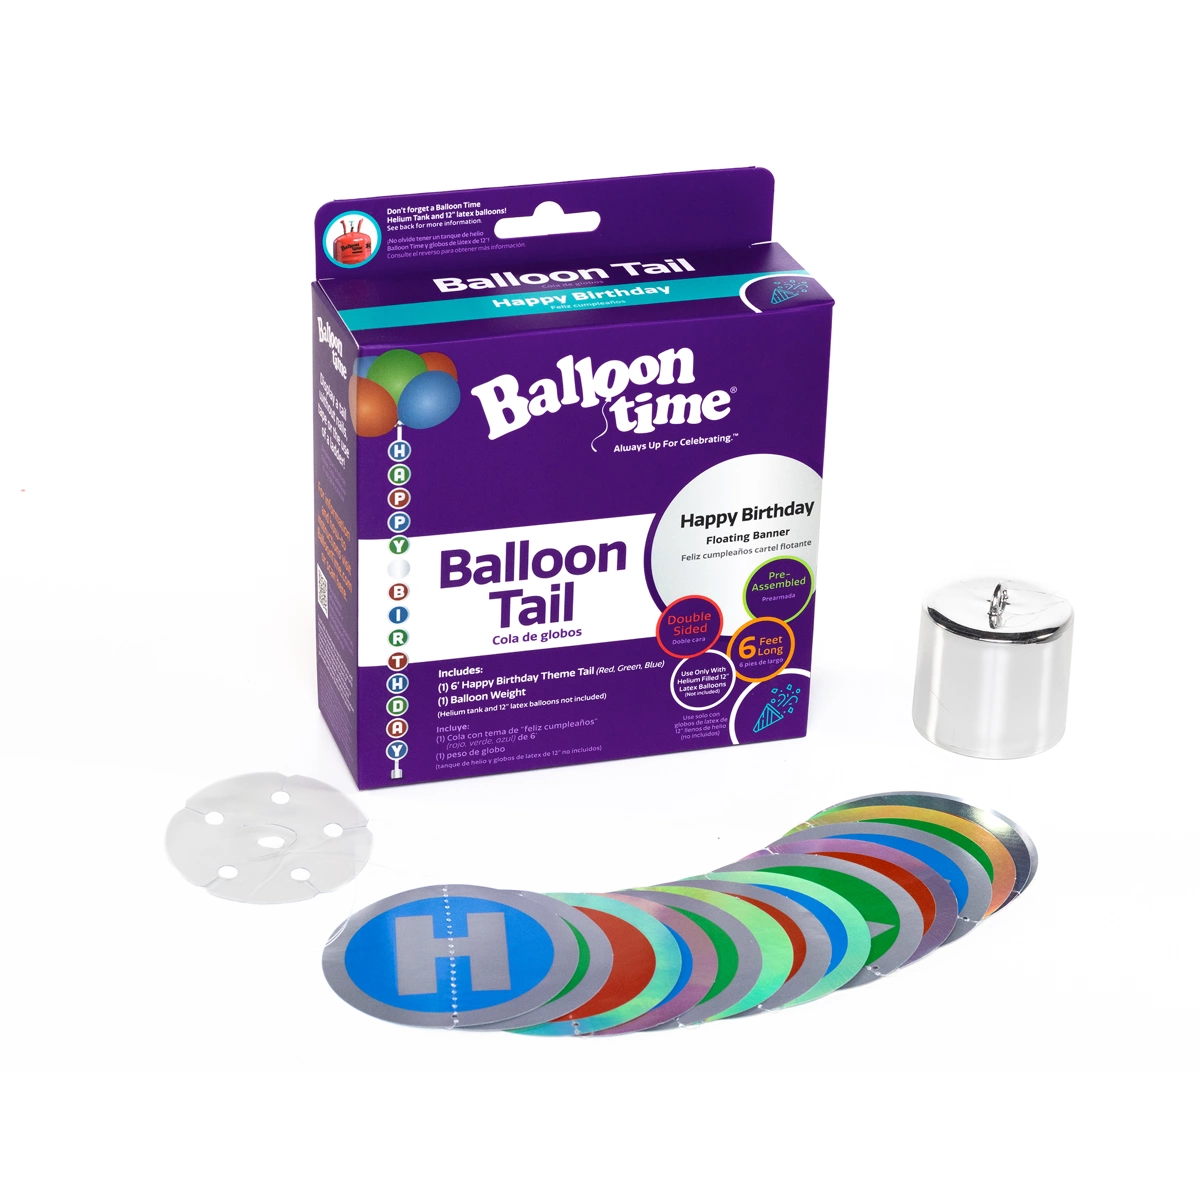 Primary Color Balloon Tail Box with tail and weight